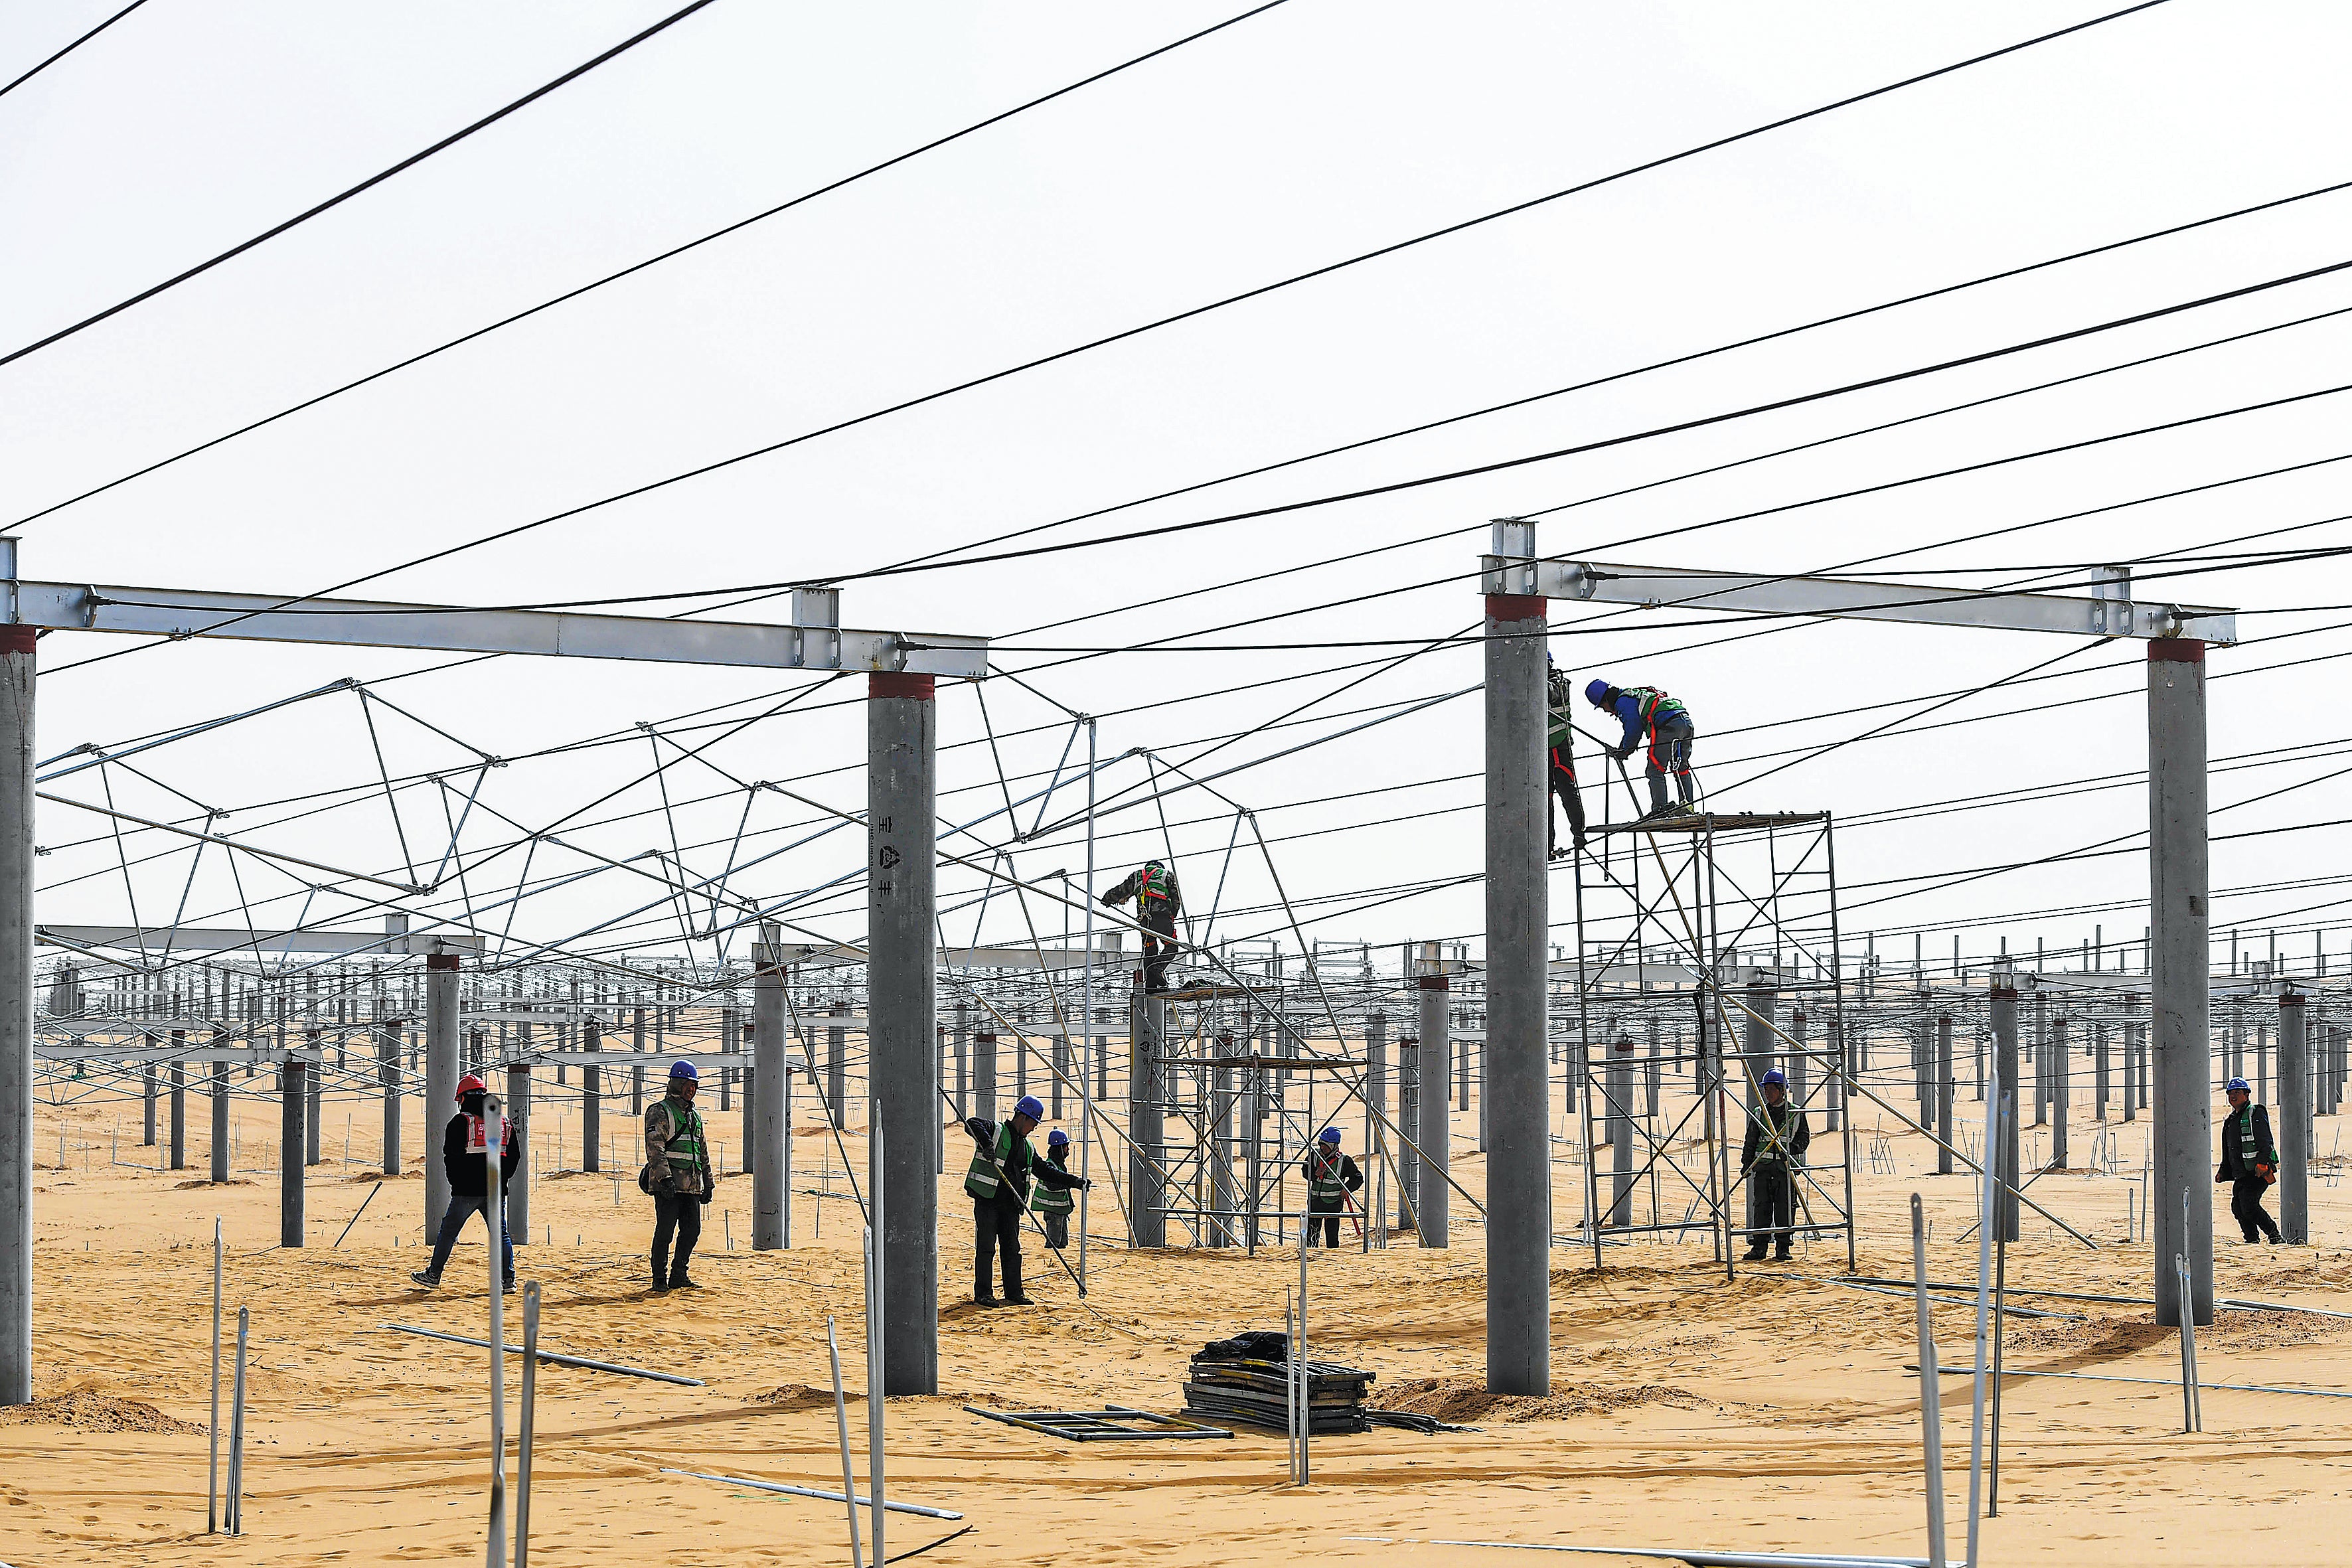 Workers set up frameworks for a solar power project in Kubuqi desert in the Inner Mongolia autonomous region